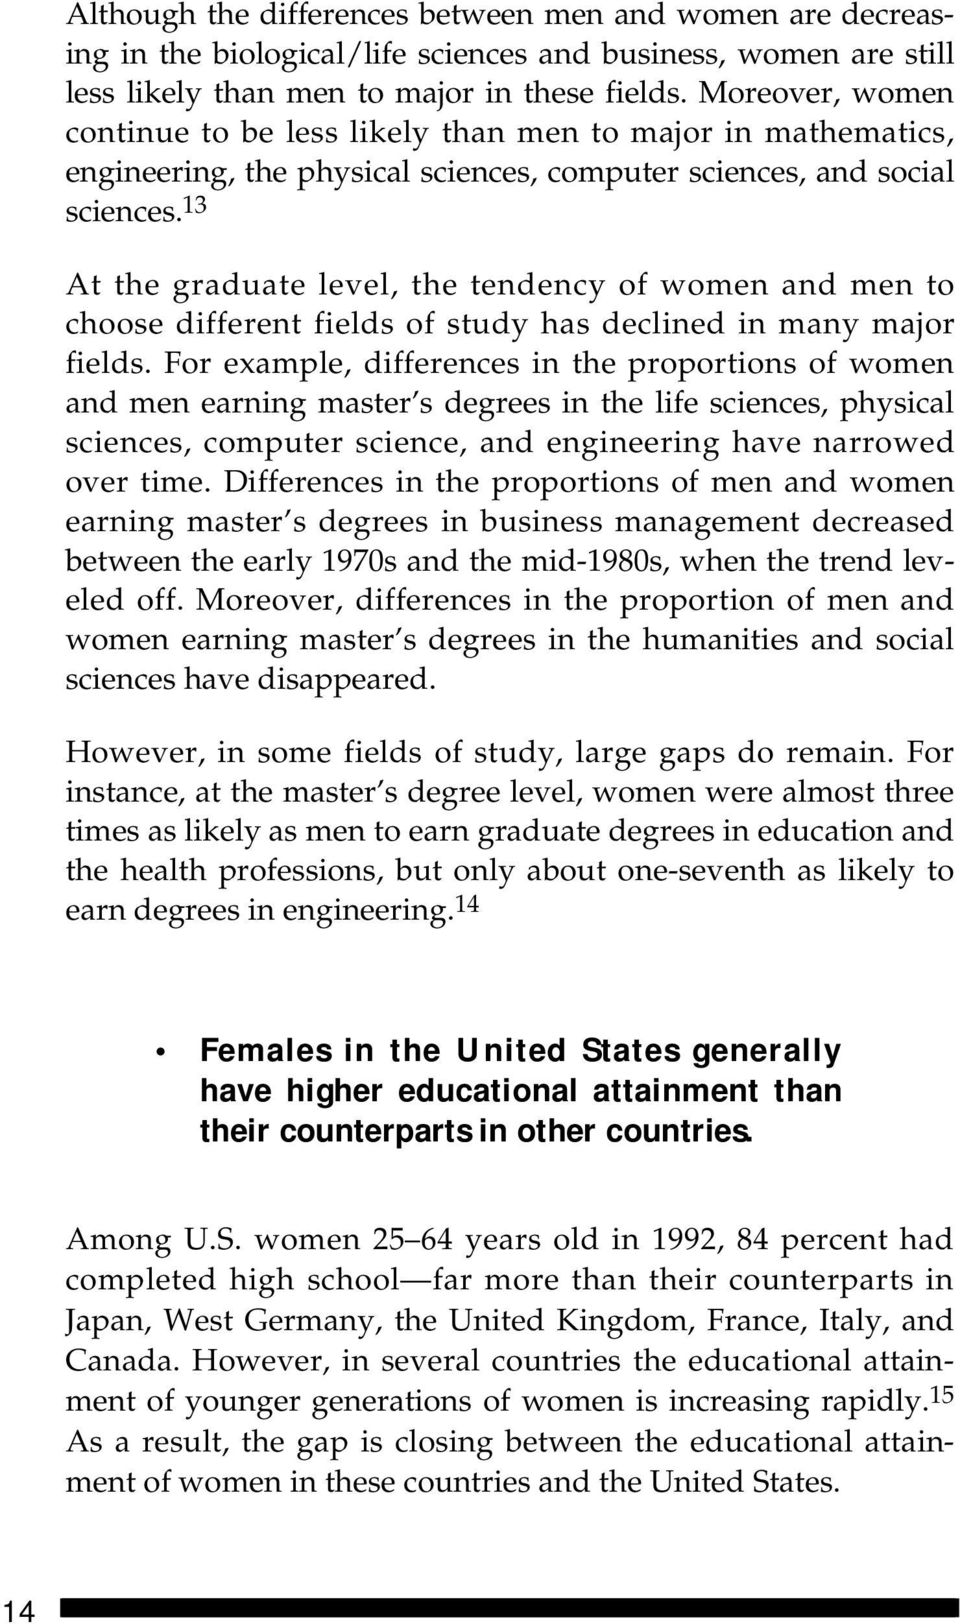 13 At the graduate level, the tendency of women and men to choose different fields of study has declined in many major fields.